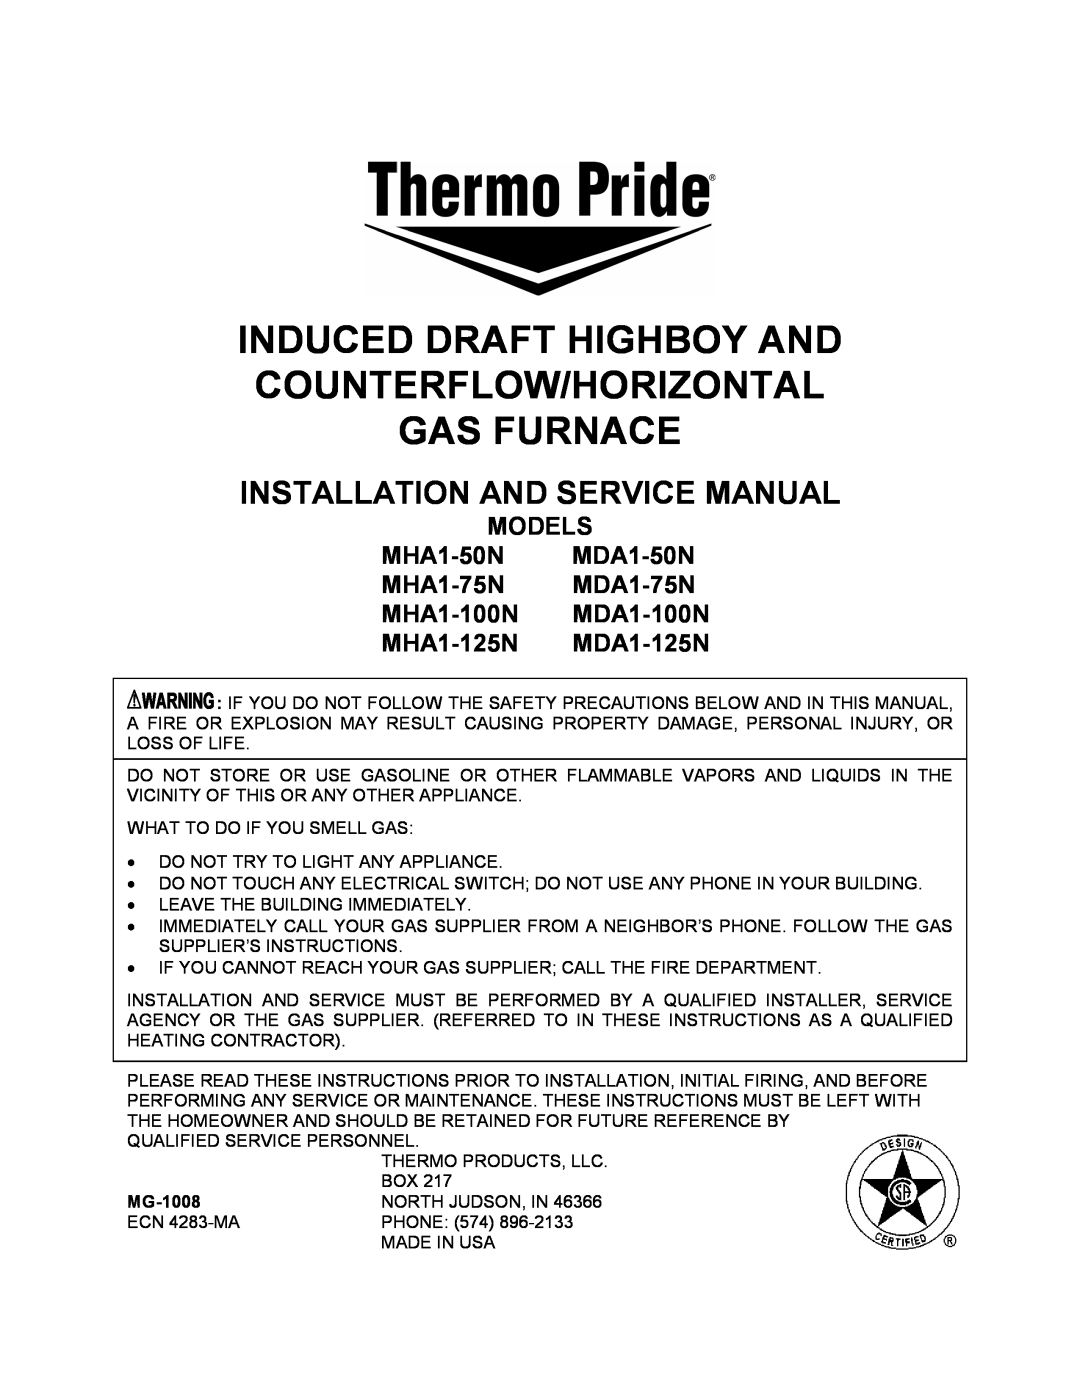 Thermo Products service manual MODELS MHA1-50N MDA1-50N MHA1-75N MDA1-75N, MHA1-100N MDA1-100N MHA1-125N MDA1-125N 